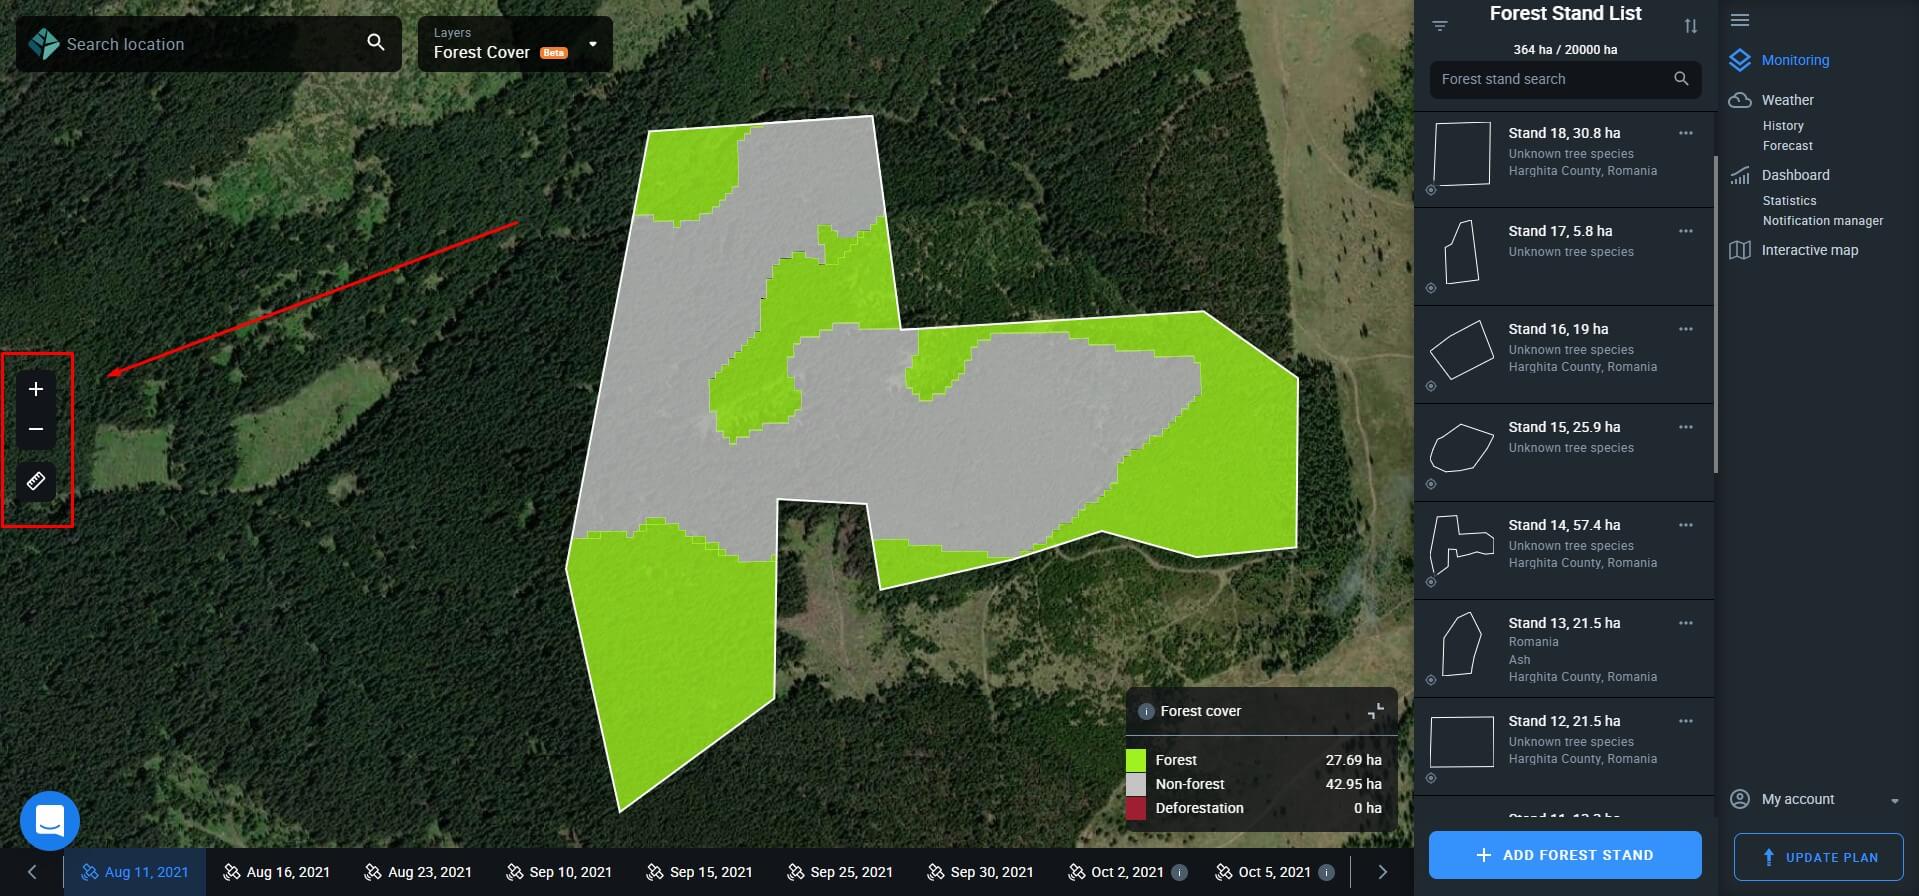 protest compact Economy Global Map & Features | EOSDA Forest Monitoring Guide